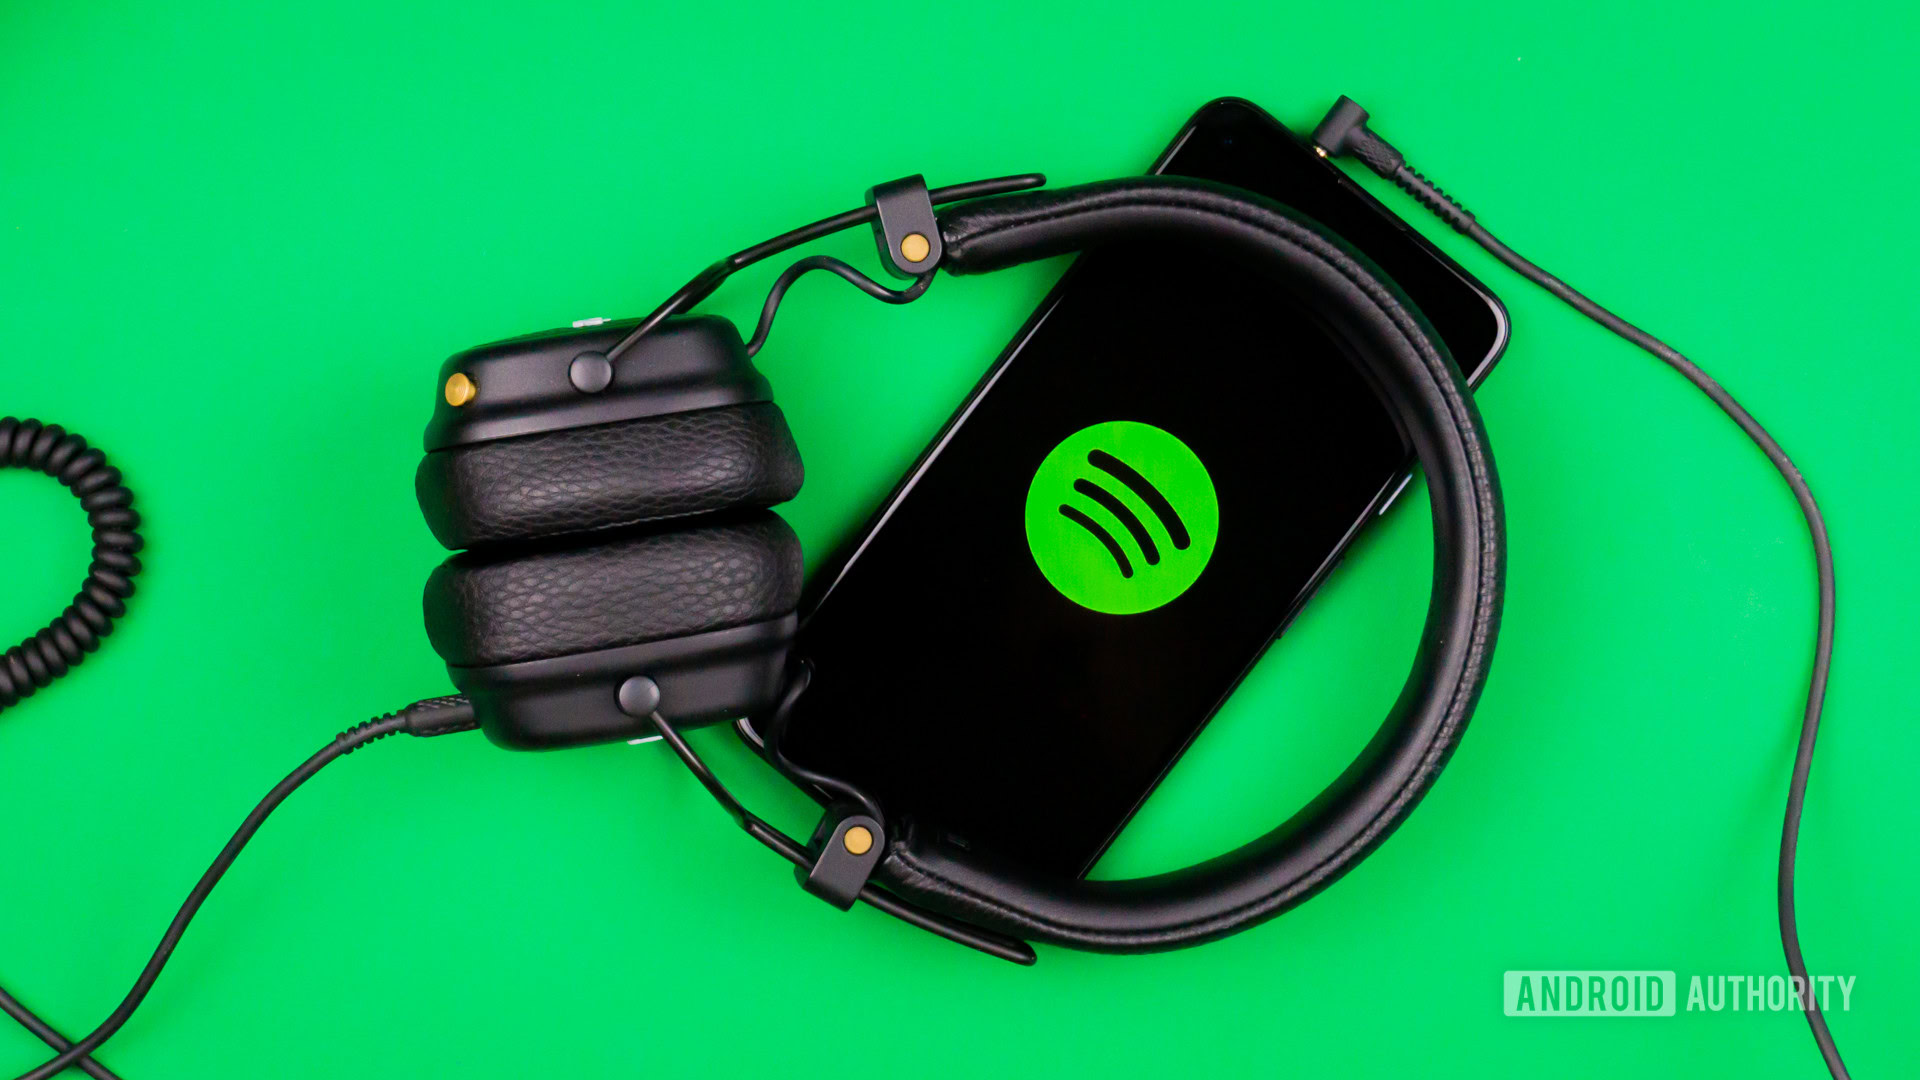 Spotify Jams could soon let you chat with friends as you listen together